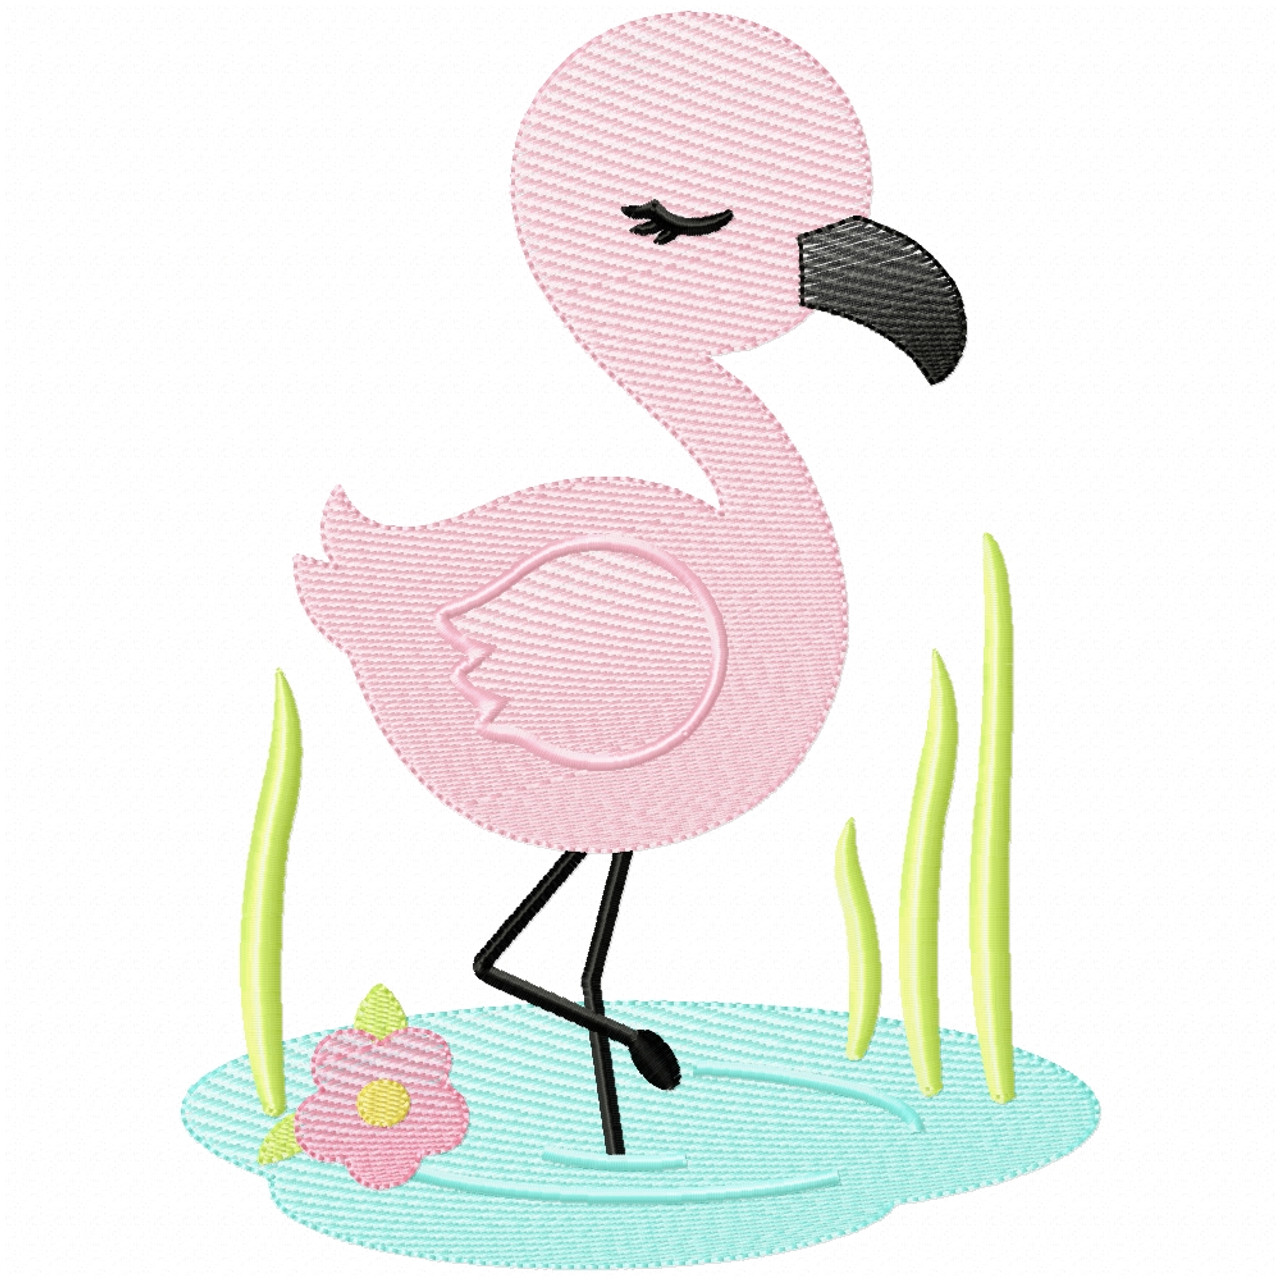 Wading Flamingo Simple Stitch and Sketch Fill Applique Embroidery Design